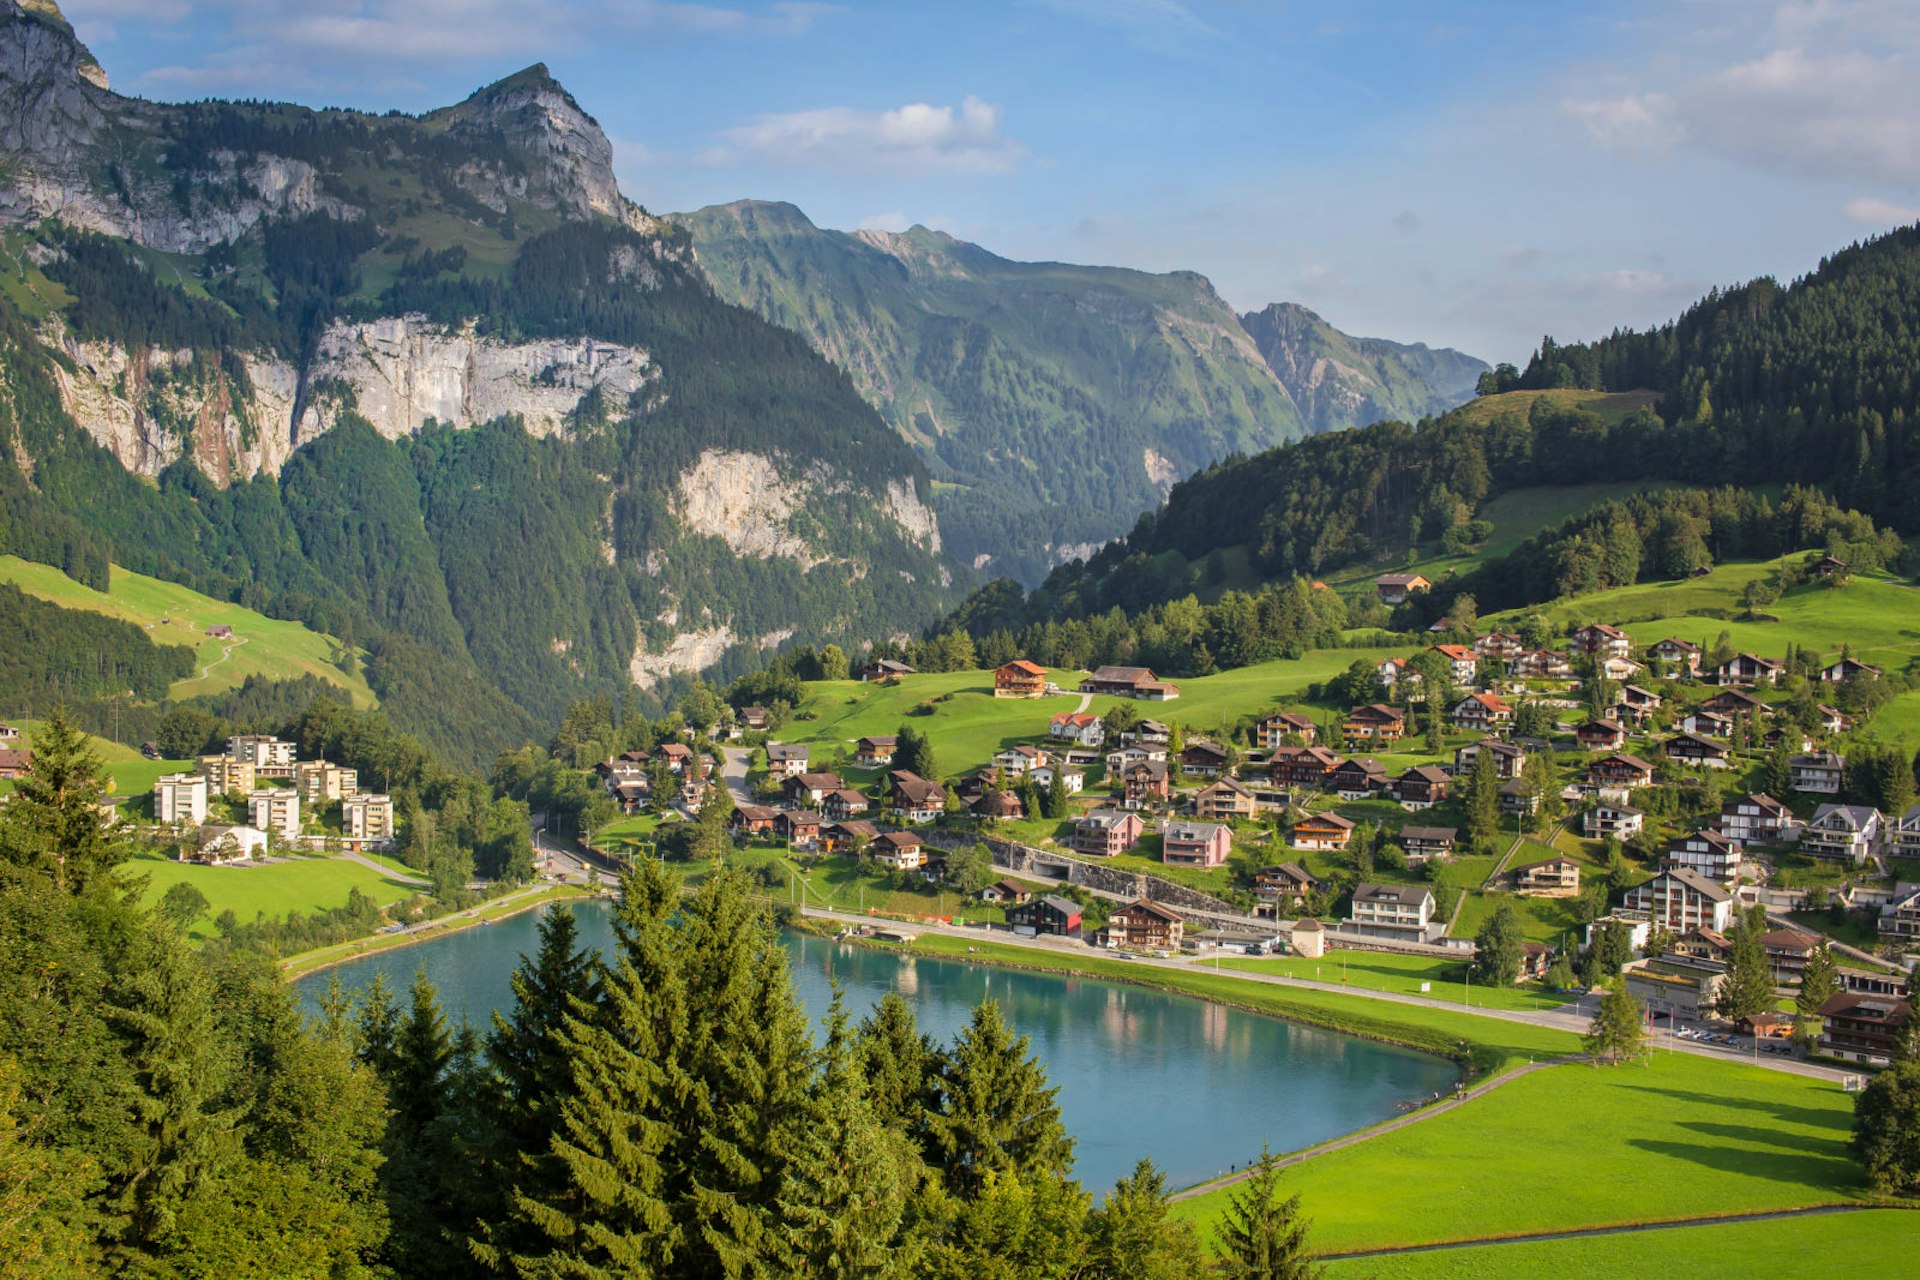 The beautiful lake and green hills of Engelberg village in Switzerland as seen from high above © Sizhe_Hu/Shutterstock